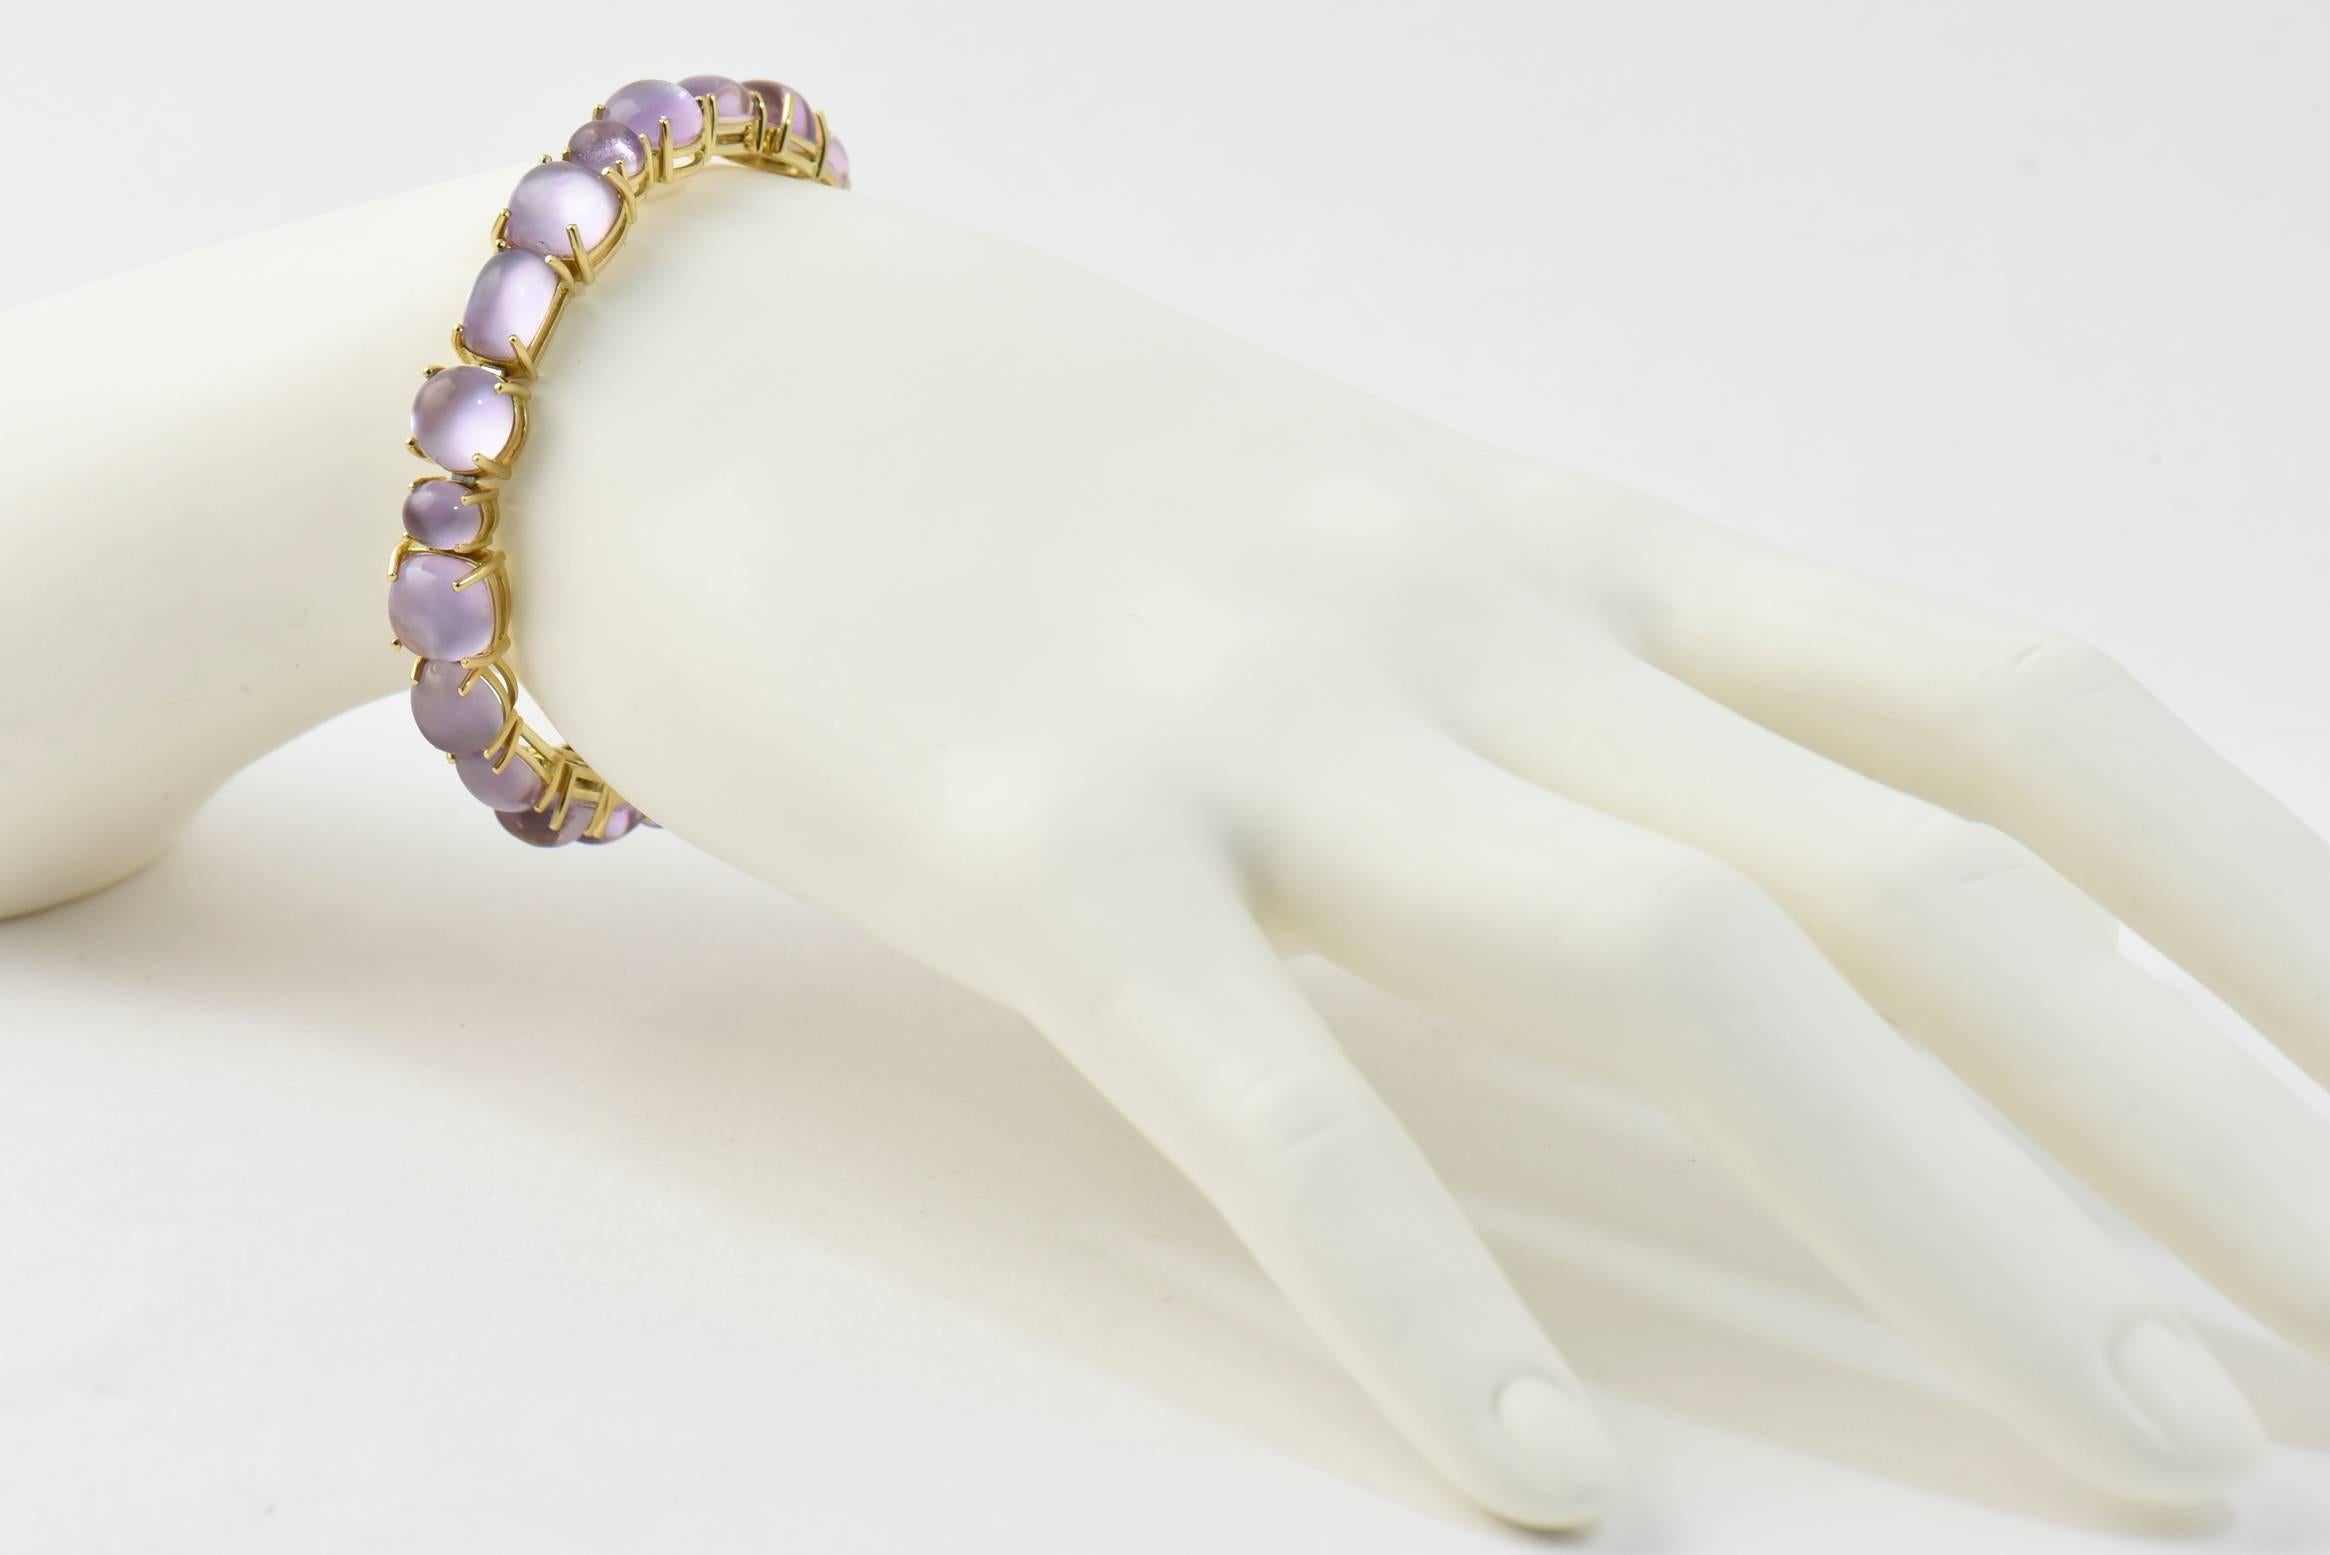 Roberto Coin Shanghai Amethyst Gold Bangle Bracelet features 42 carats of amethyst mounted in a 18k yellow gold.  This bracelet has multi-shape prong set amethyst station.  It is made in Italy.

Estimated Retail $6,000